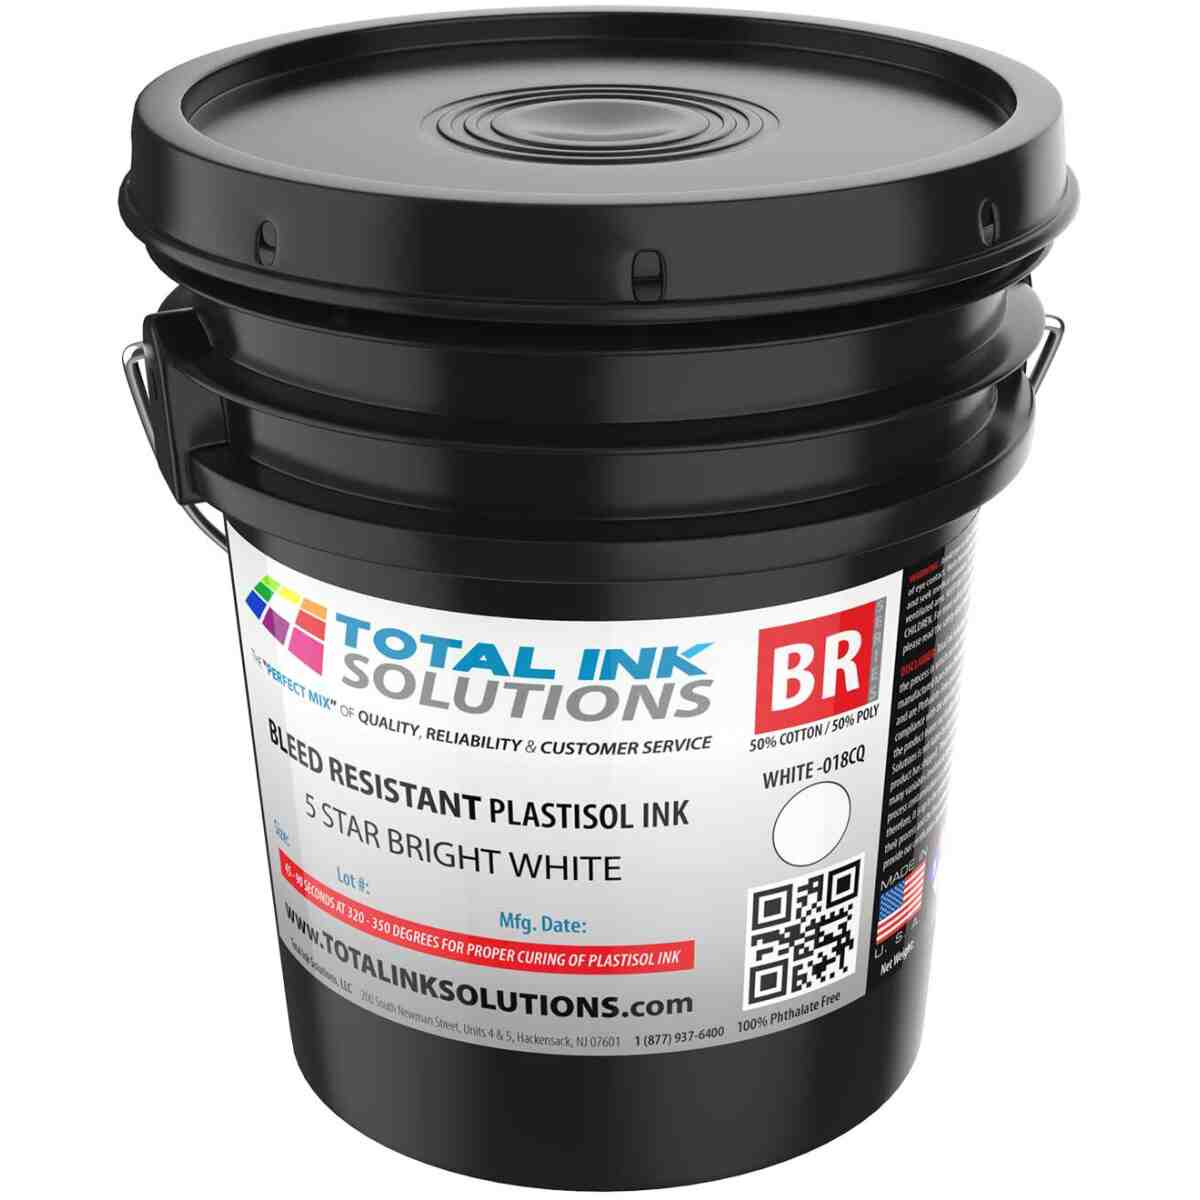 Bleed Resistant Plastisol Ink - 5 Star Bright White - 5 Gallon TOTAL INK SOLUTIONS®